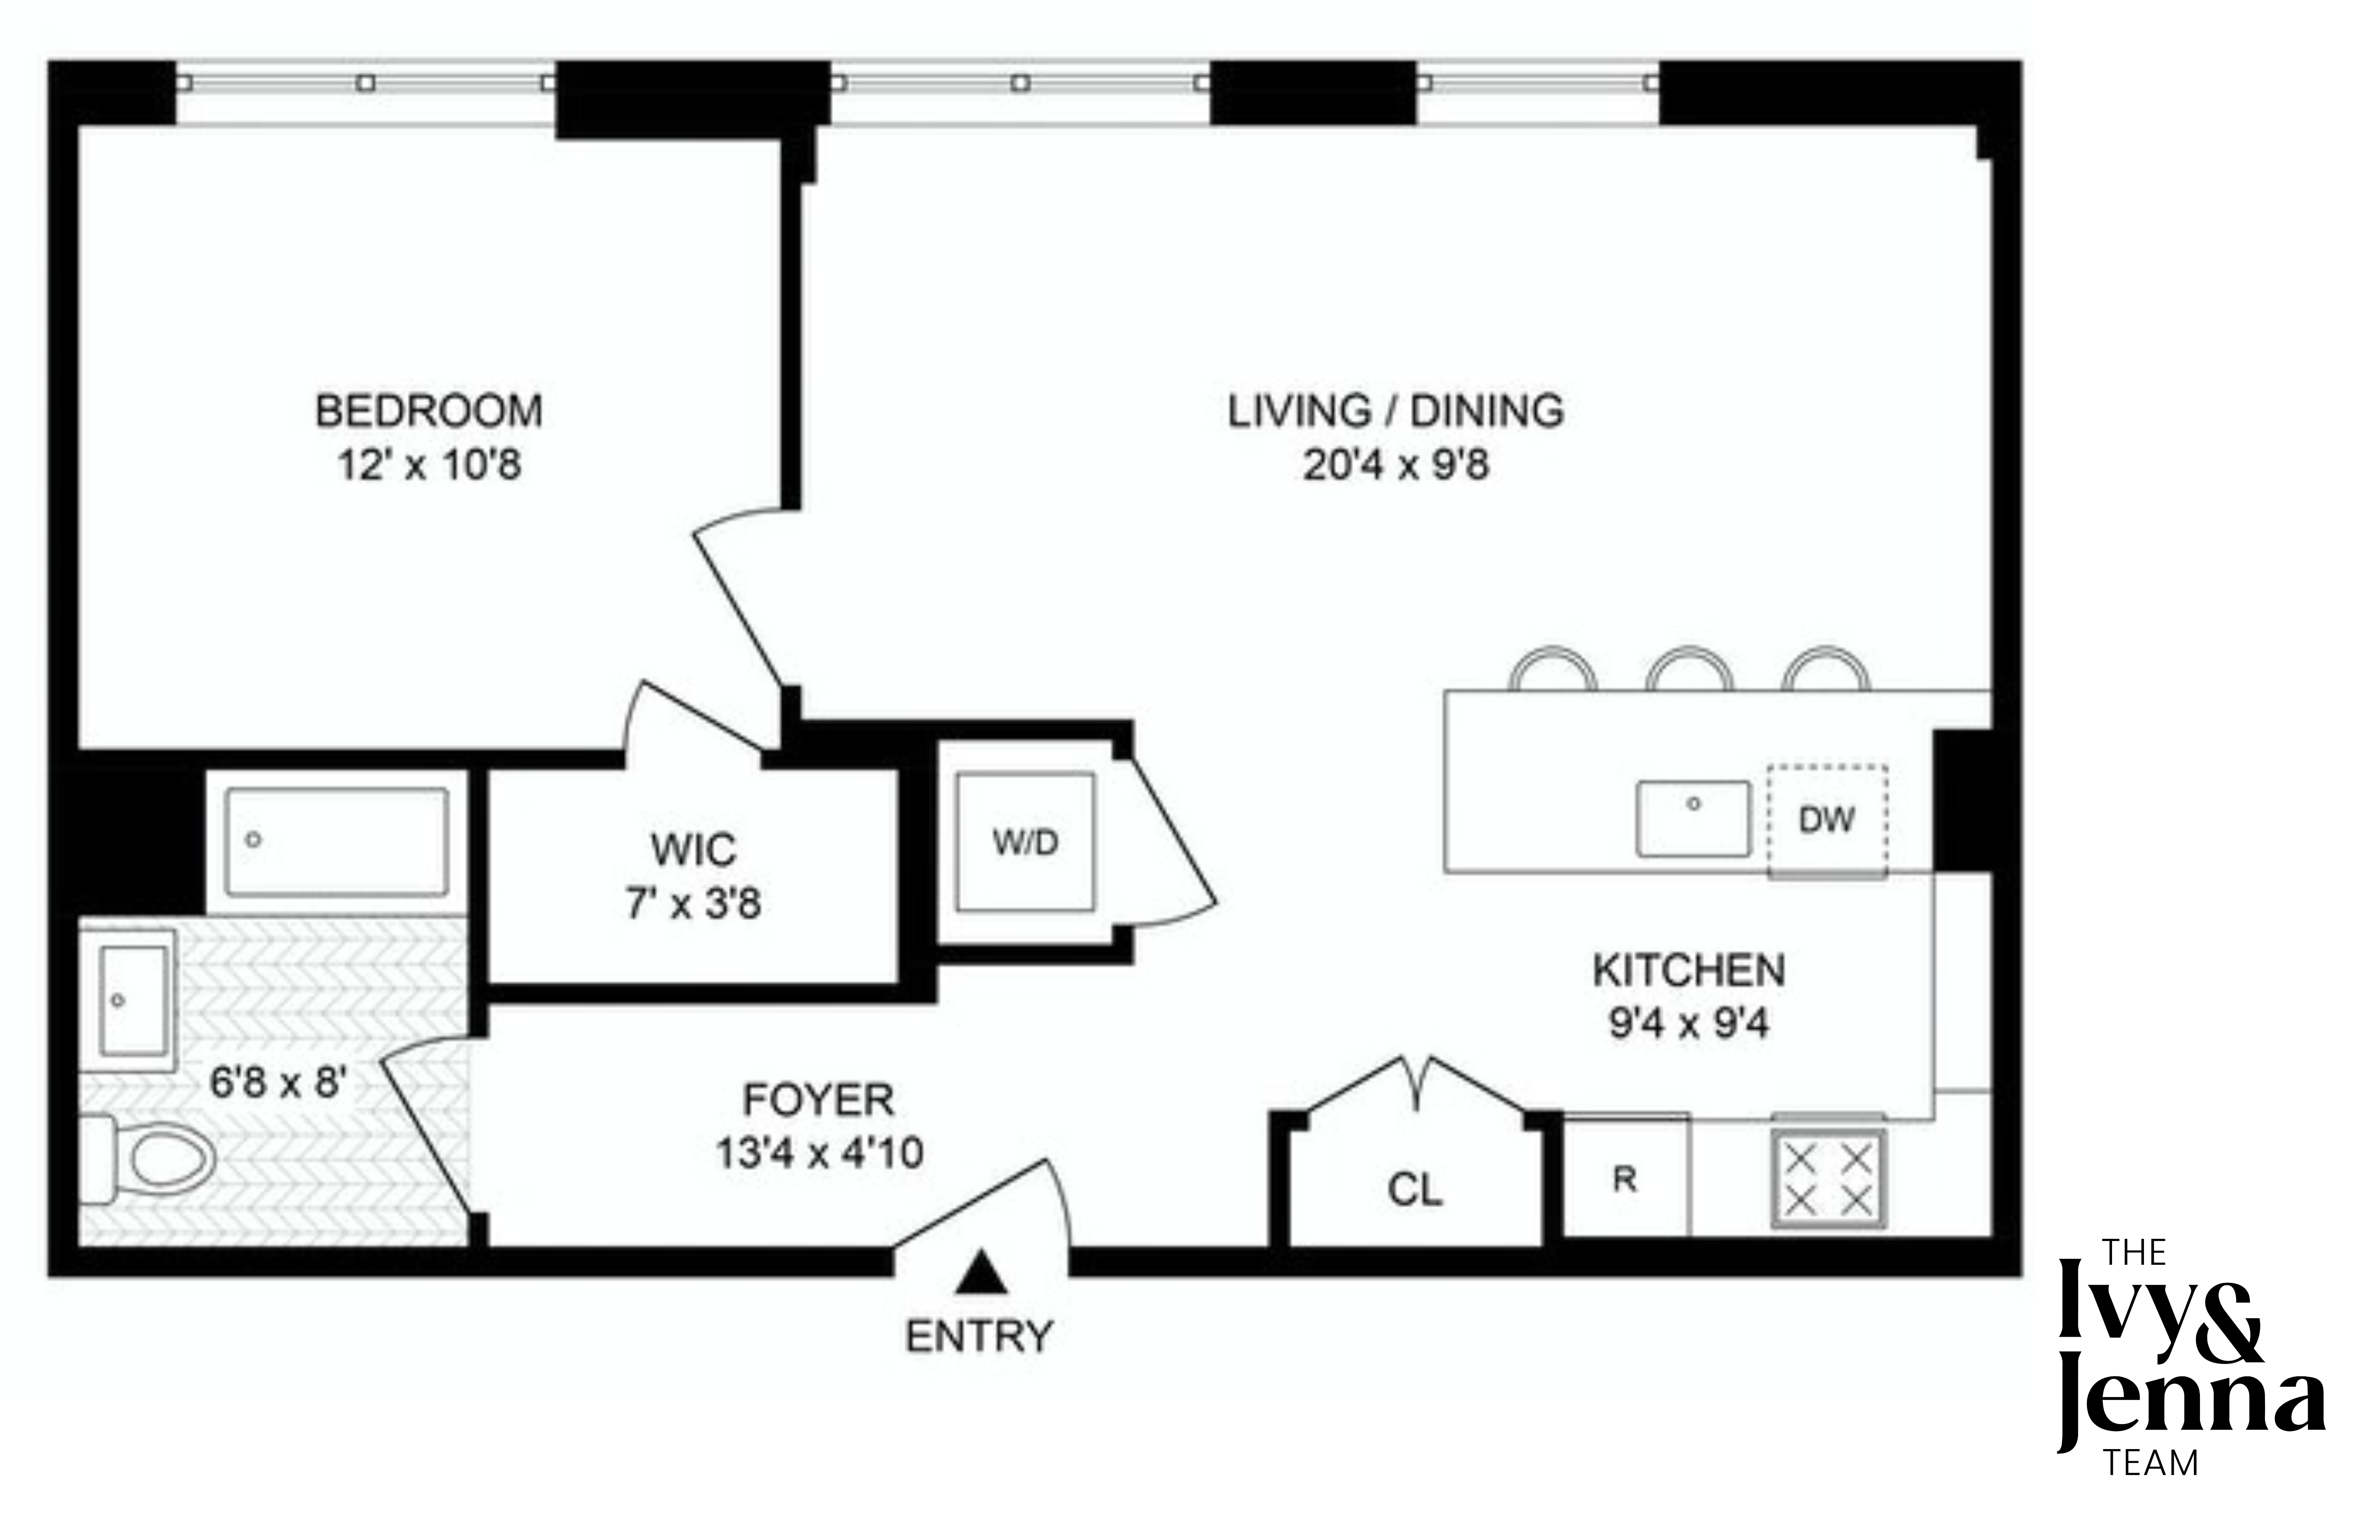 Floorplan for 100 Ave A, 2B